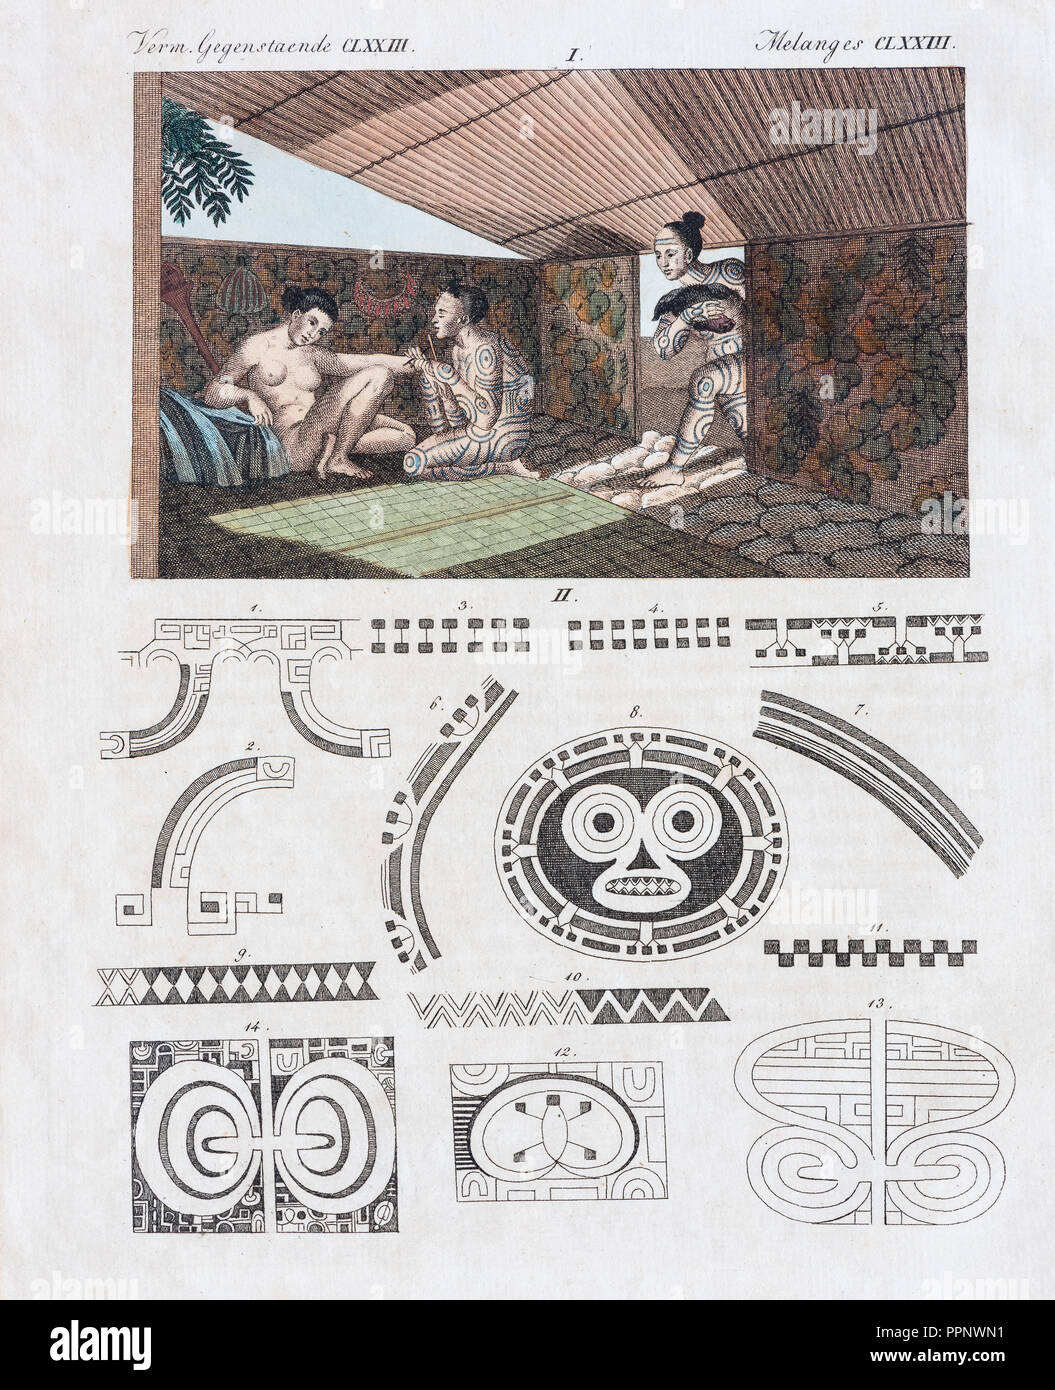 Tattoo art on Nuka Hiva, hand-colored copper engraving from Friedrich Justin Bertuch picture book for children, 1813, Weimar Stock Photo